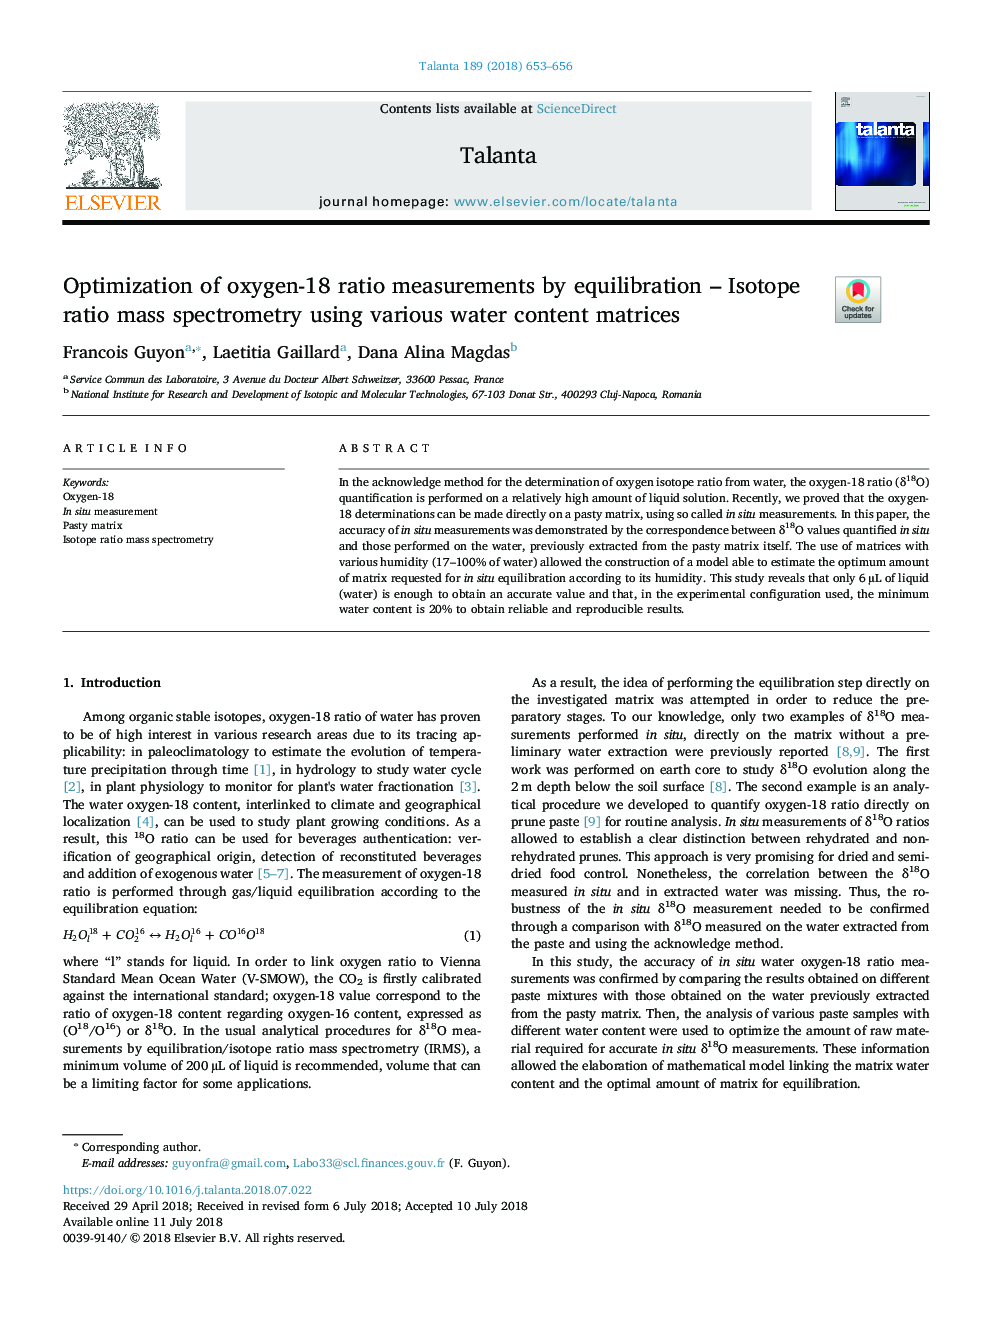 Optimization of oxygen-18 ratio measurements by equilibration - Isotope ratio mass spectrometry using various water content matrices